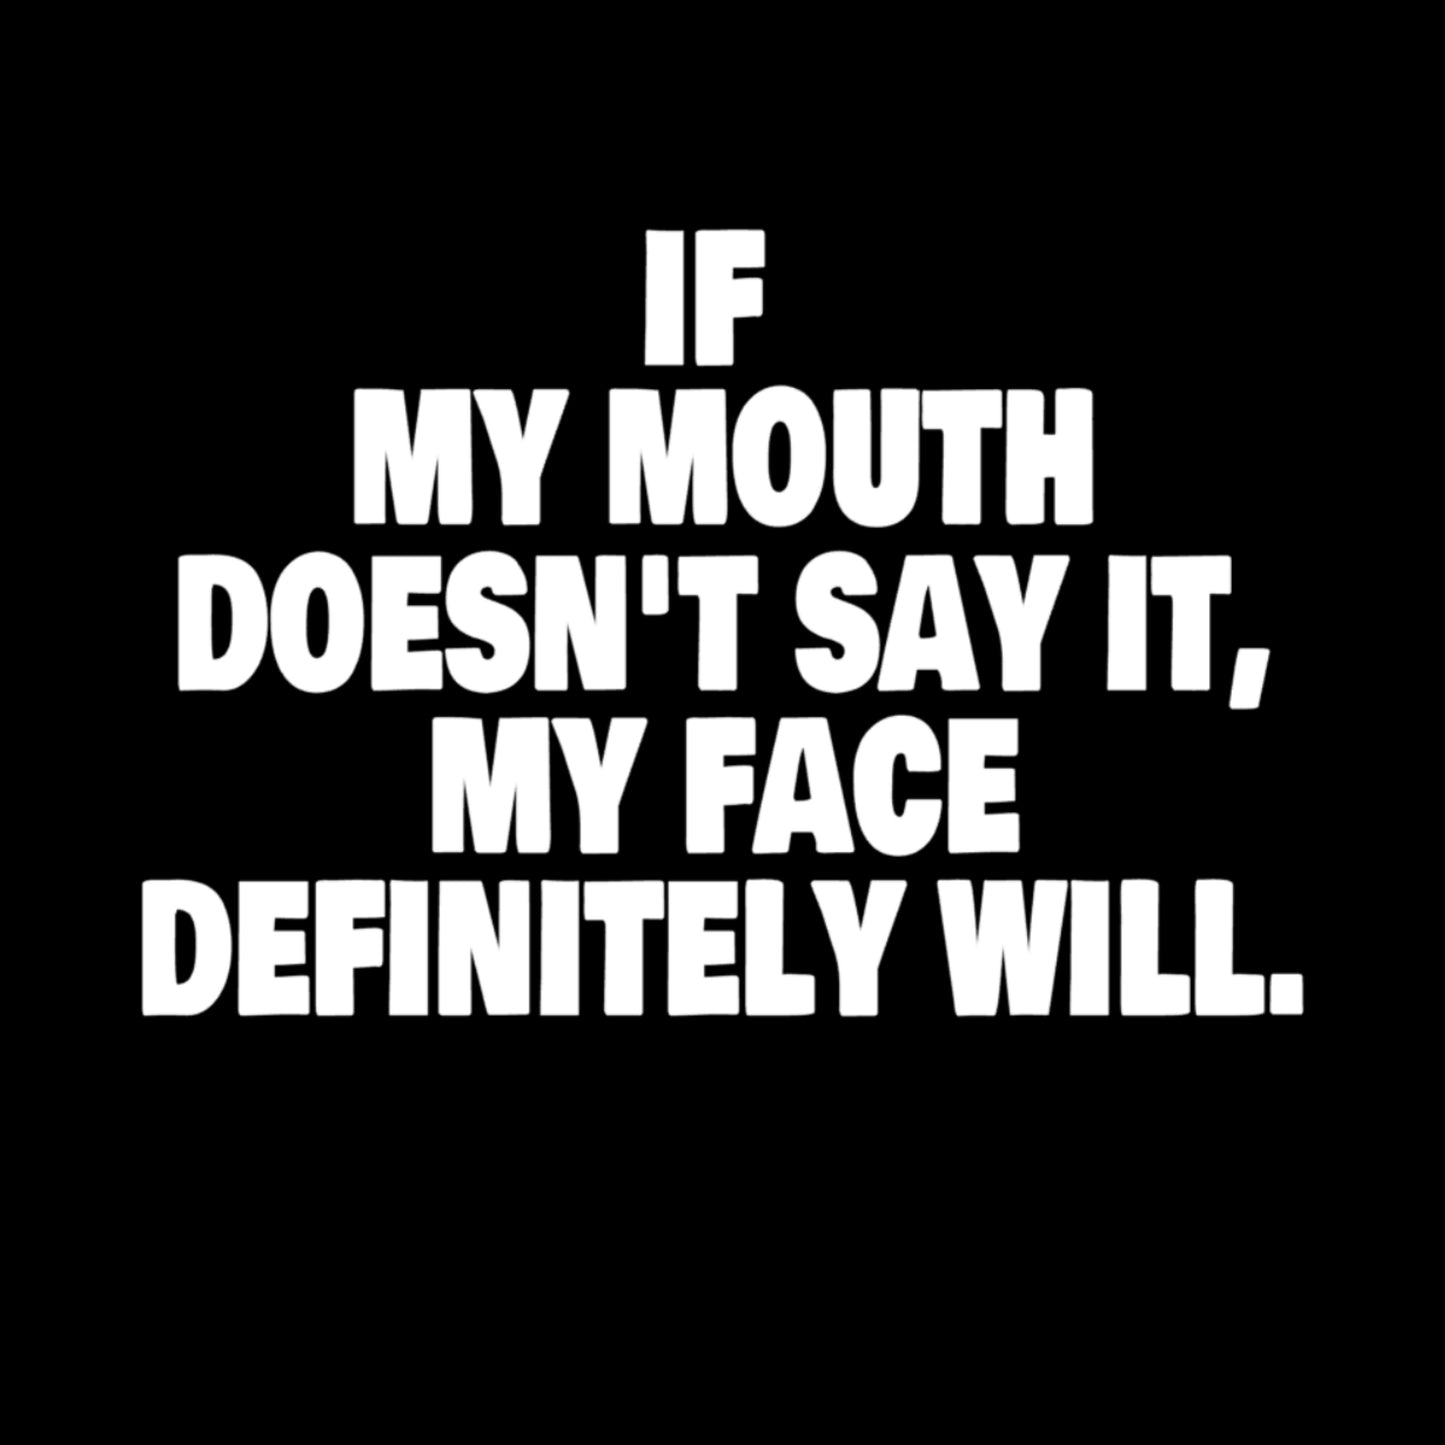 T-shirt - If my mouth doesn't say it, my face definitely will.